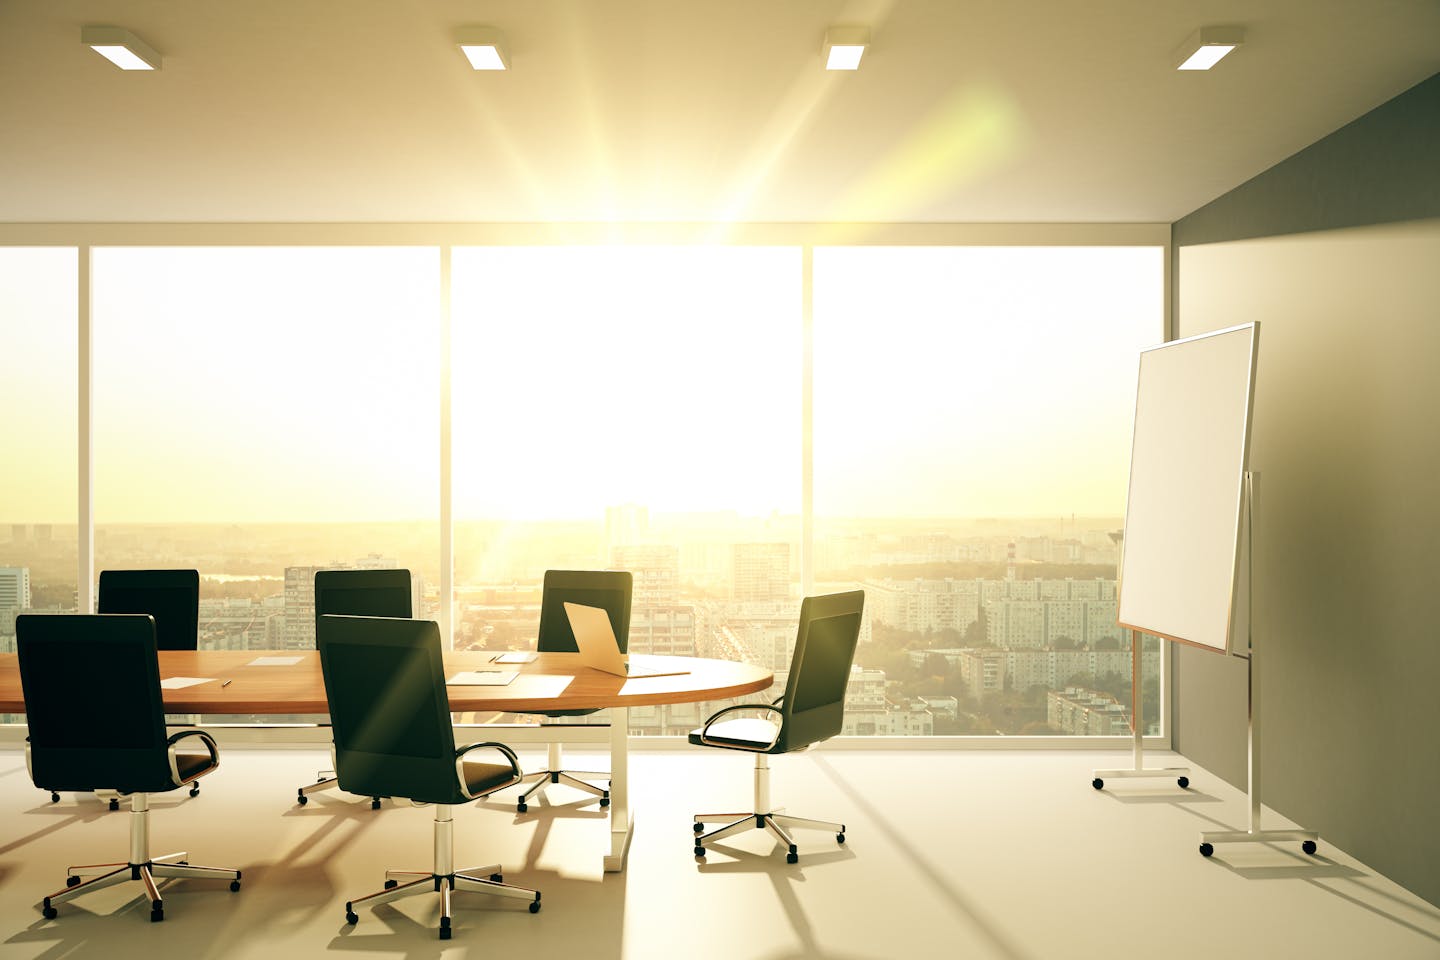 Why natural light matters in the workplace | Opinion | Eco-Business | Asia  Pacific